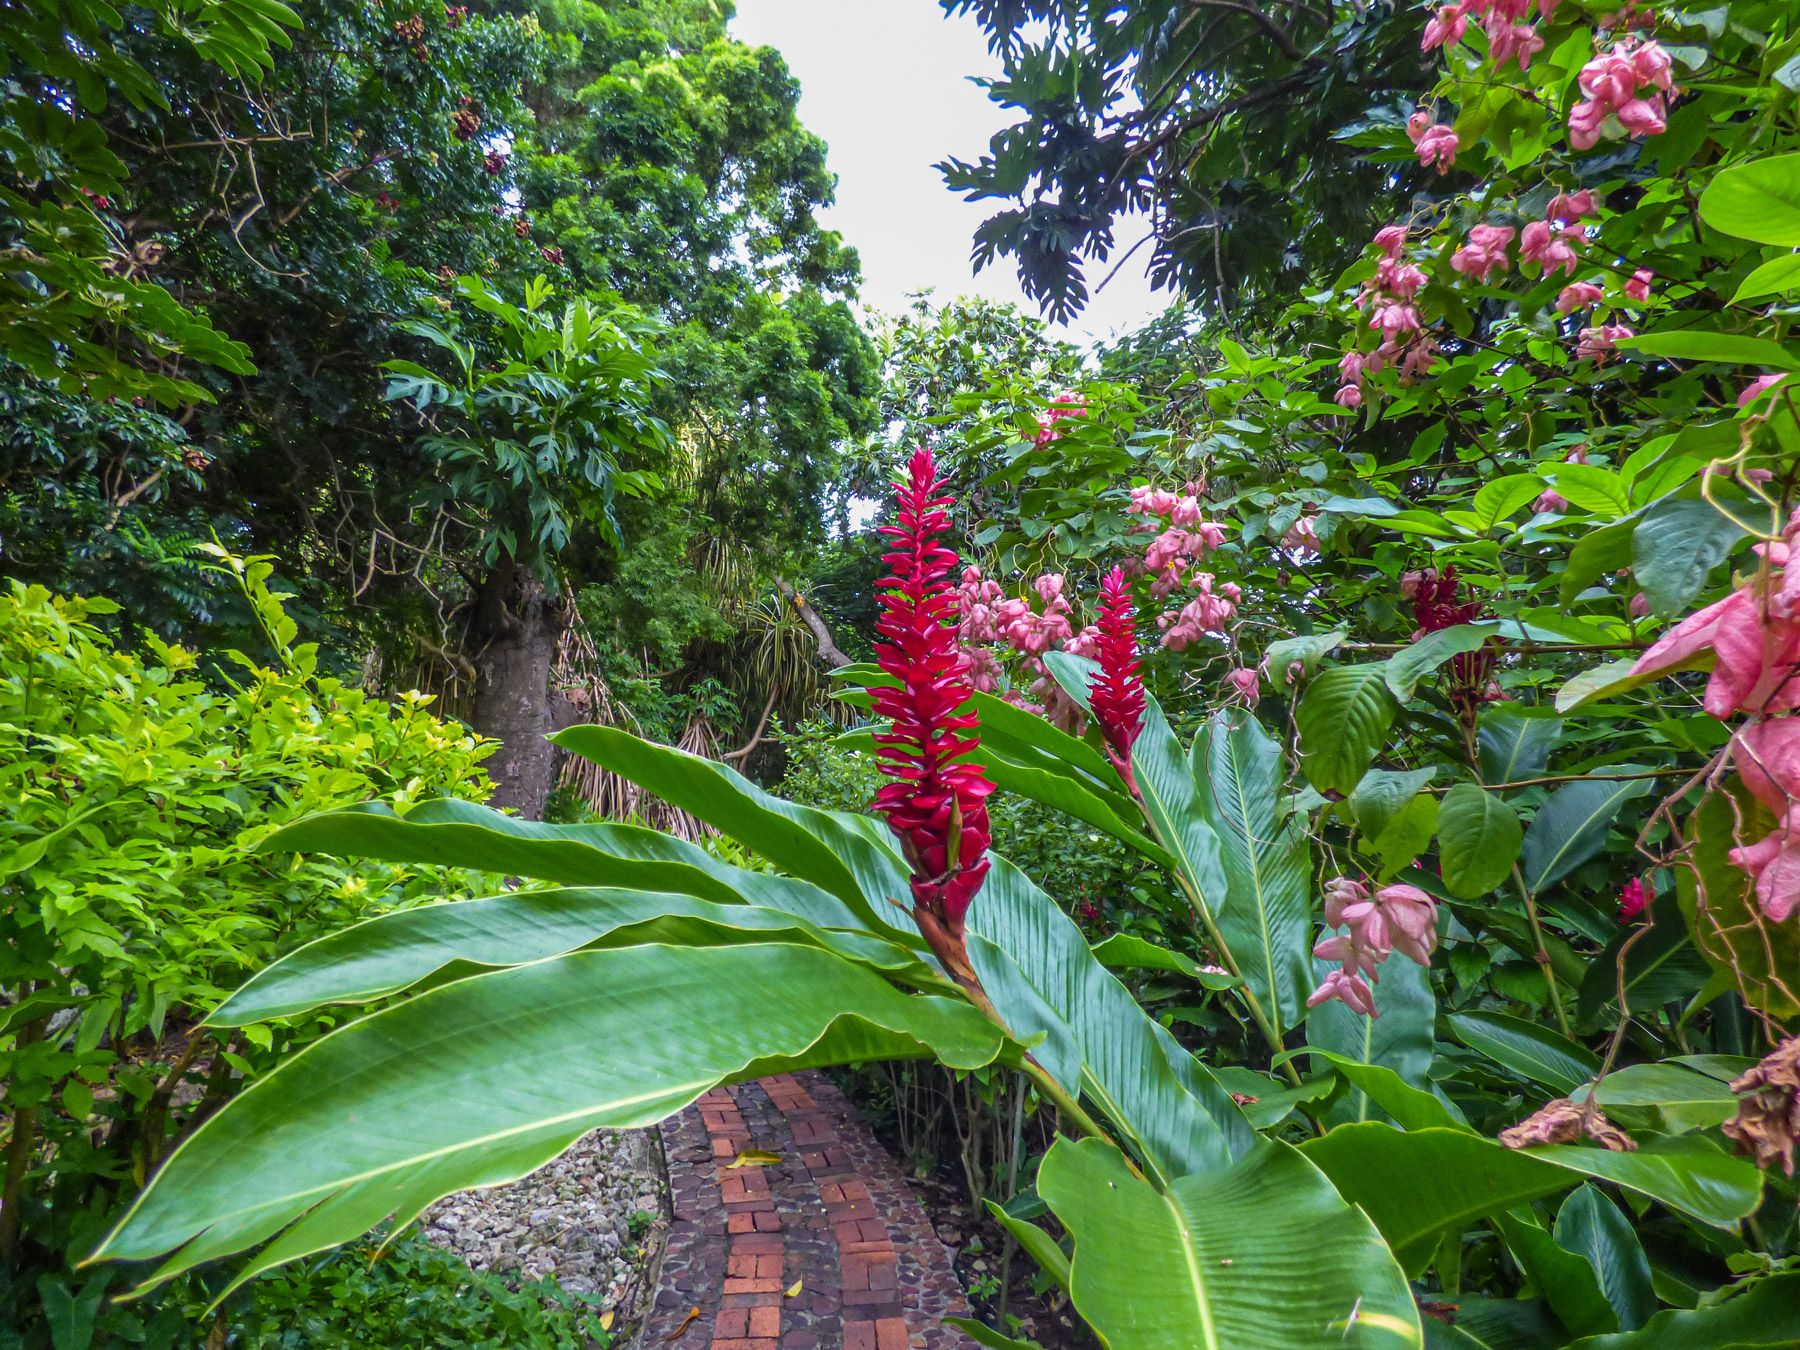 Andromedas-Botanic-Garden-trail-sorrounded-by-tropical-flowers-and-trees